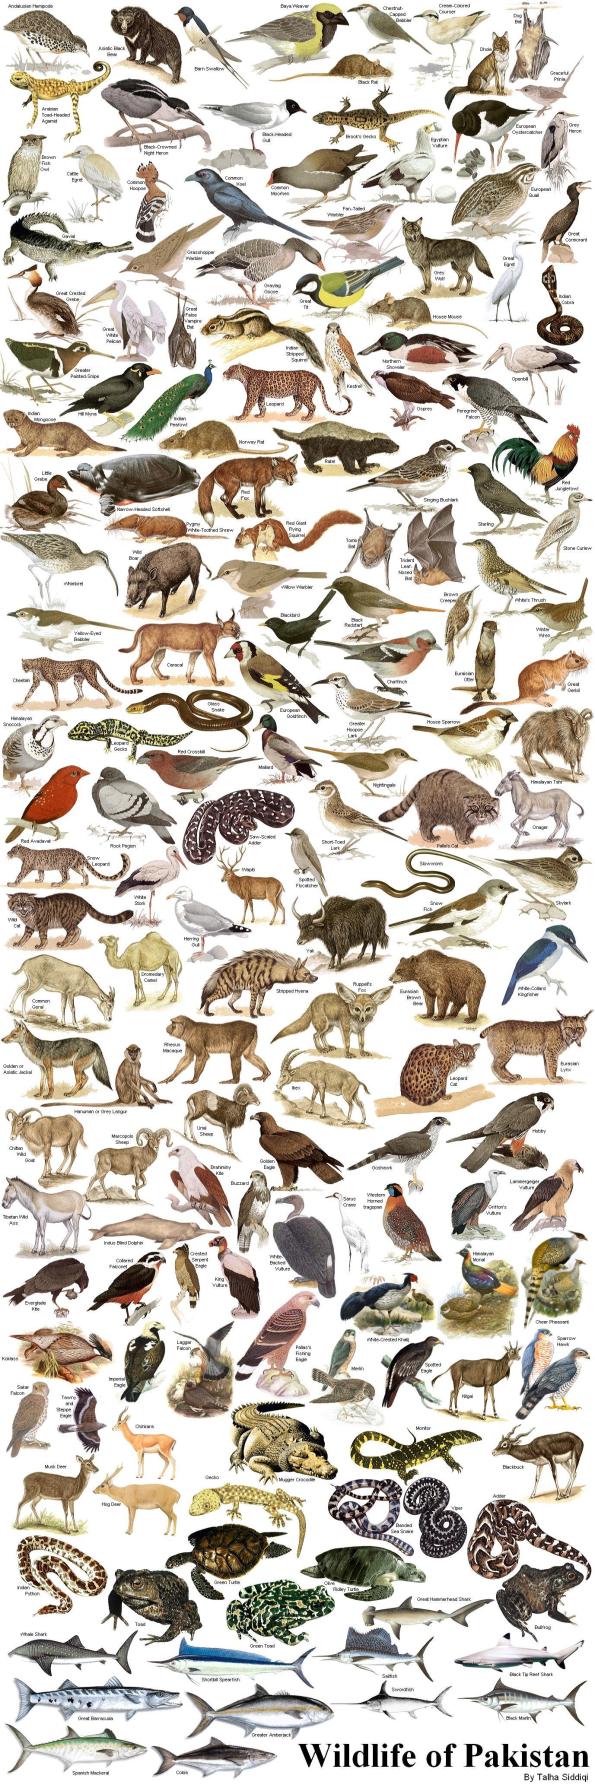 All the animals in Pakistan with pictures.